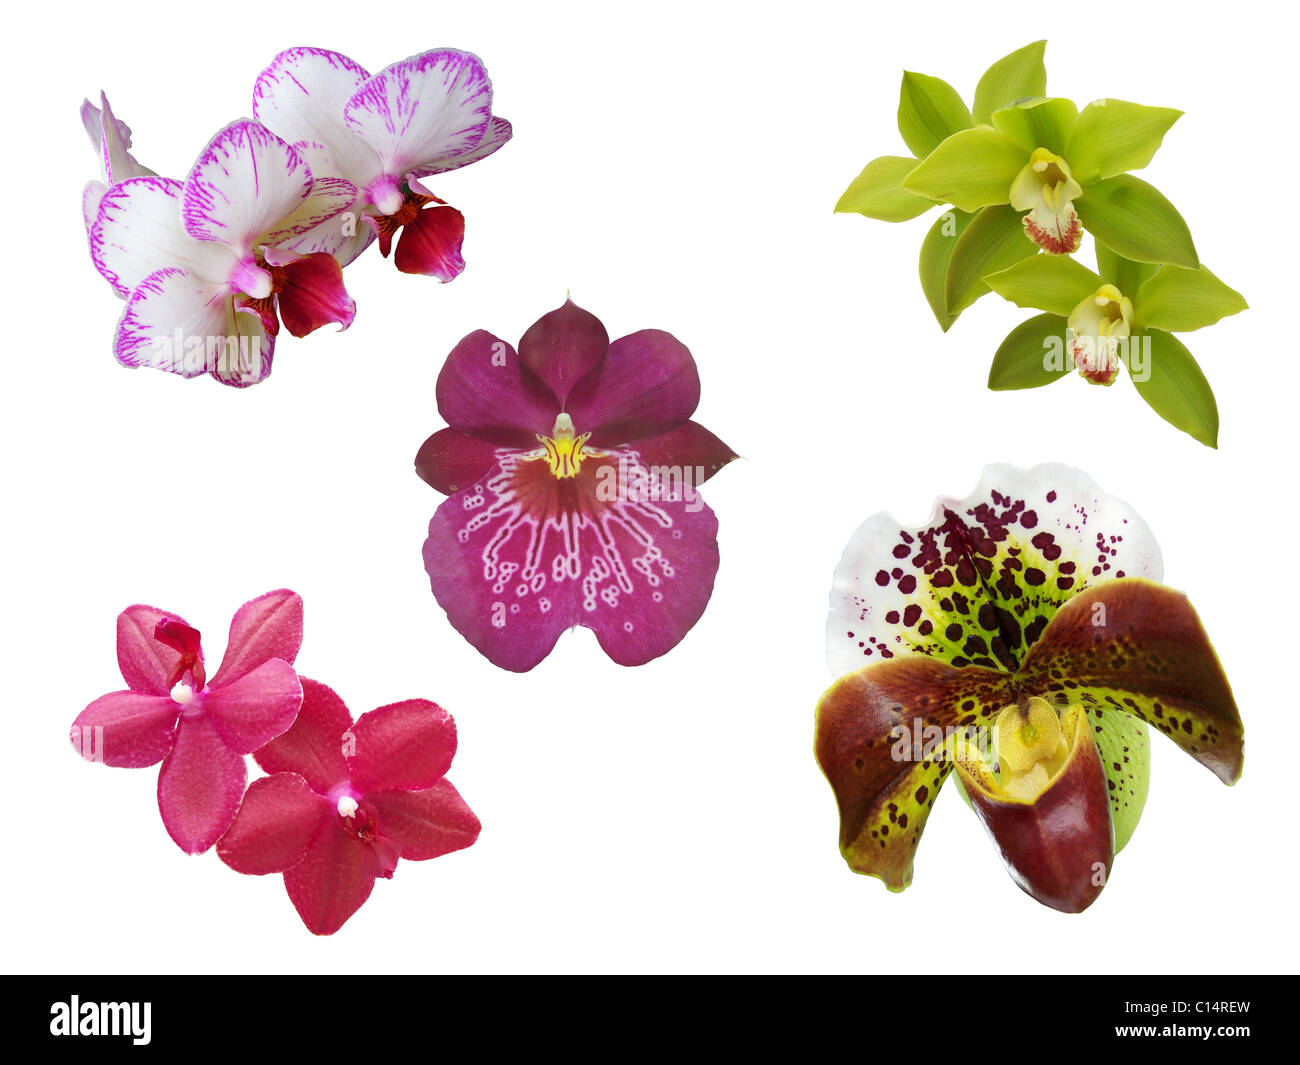 some uncommon orchid flowers Stock Photo